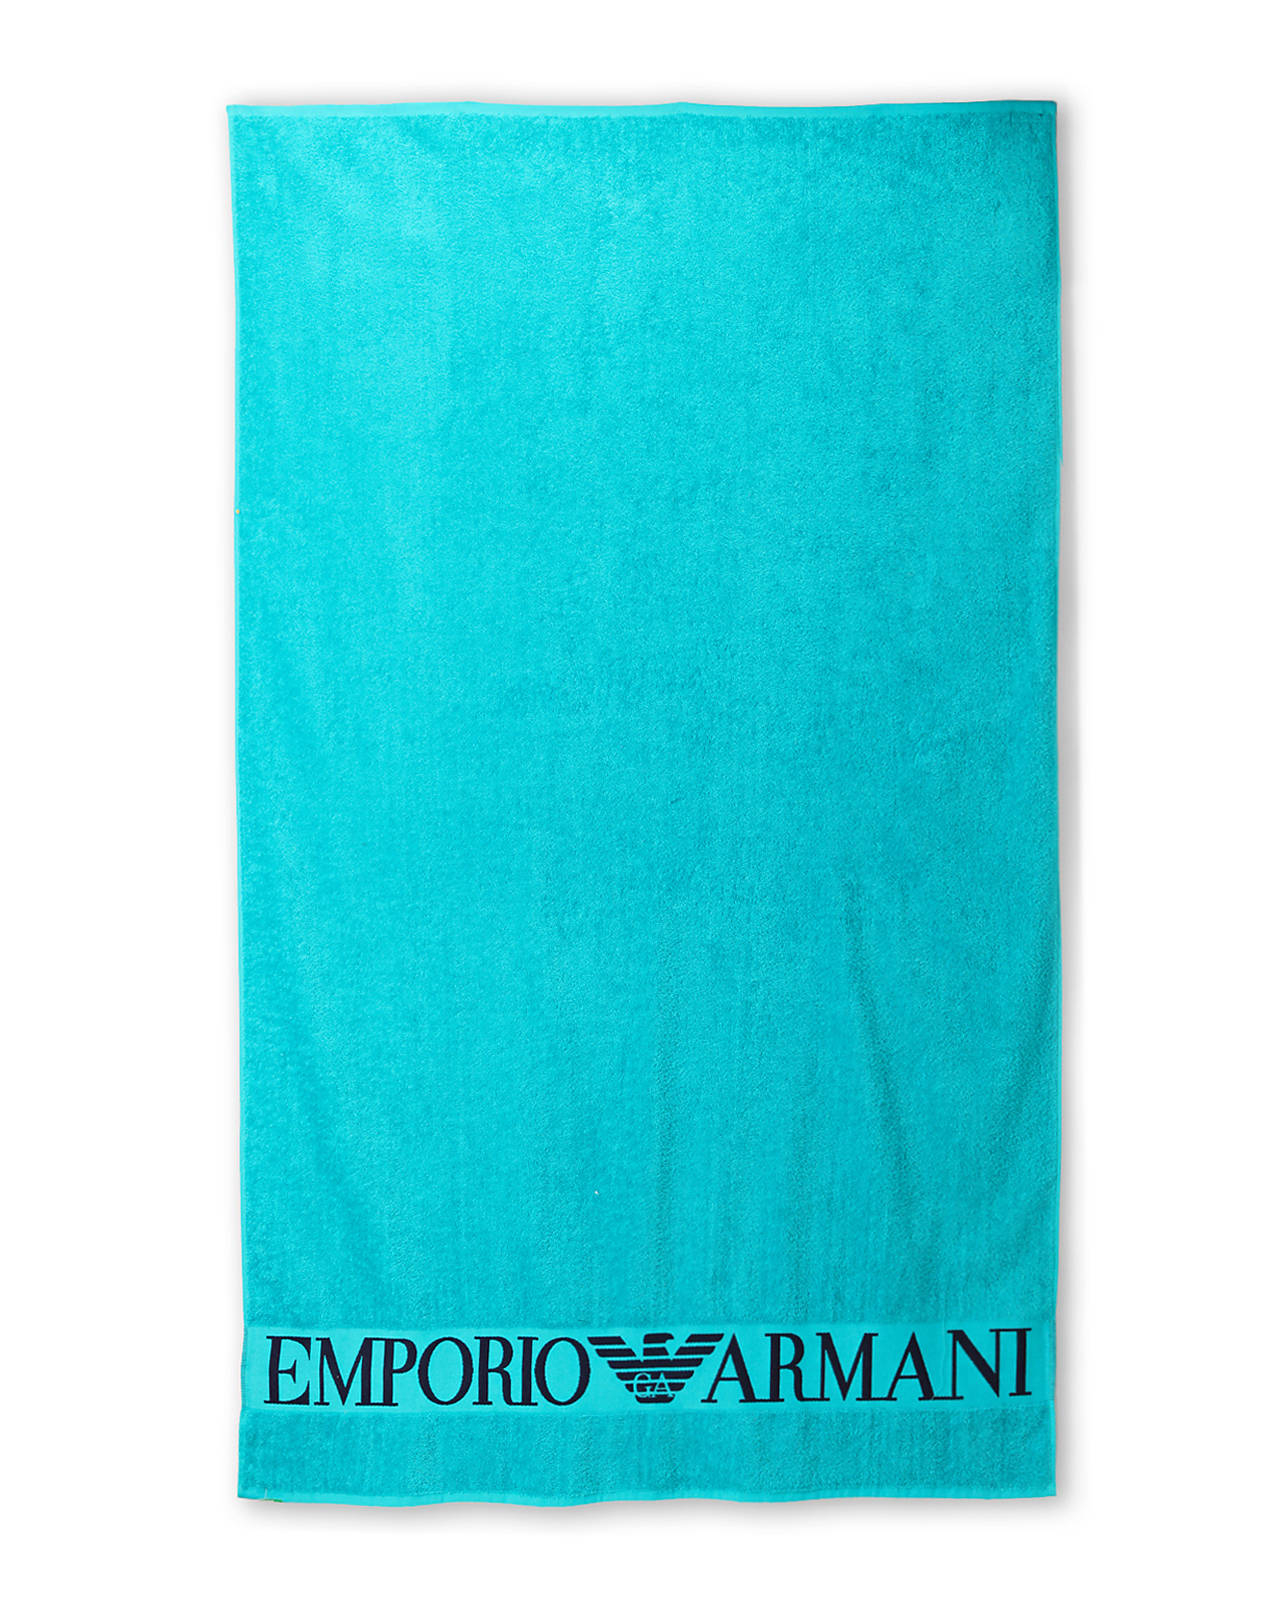 Emporio Armani Turquoise Embroidered Logo Beach Towel in Blue (SKYBLUE ...